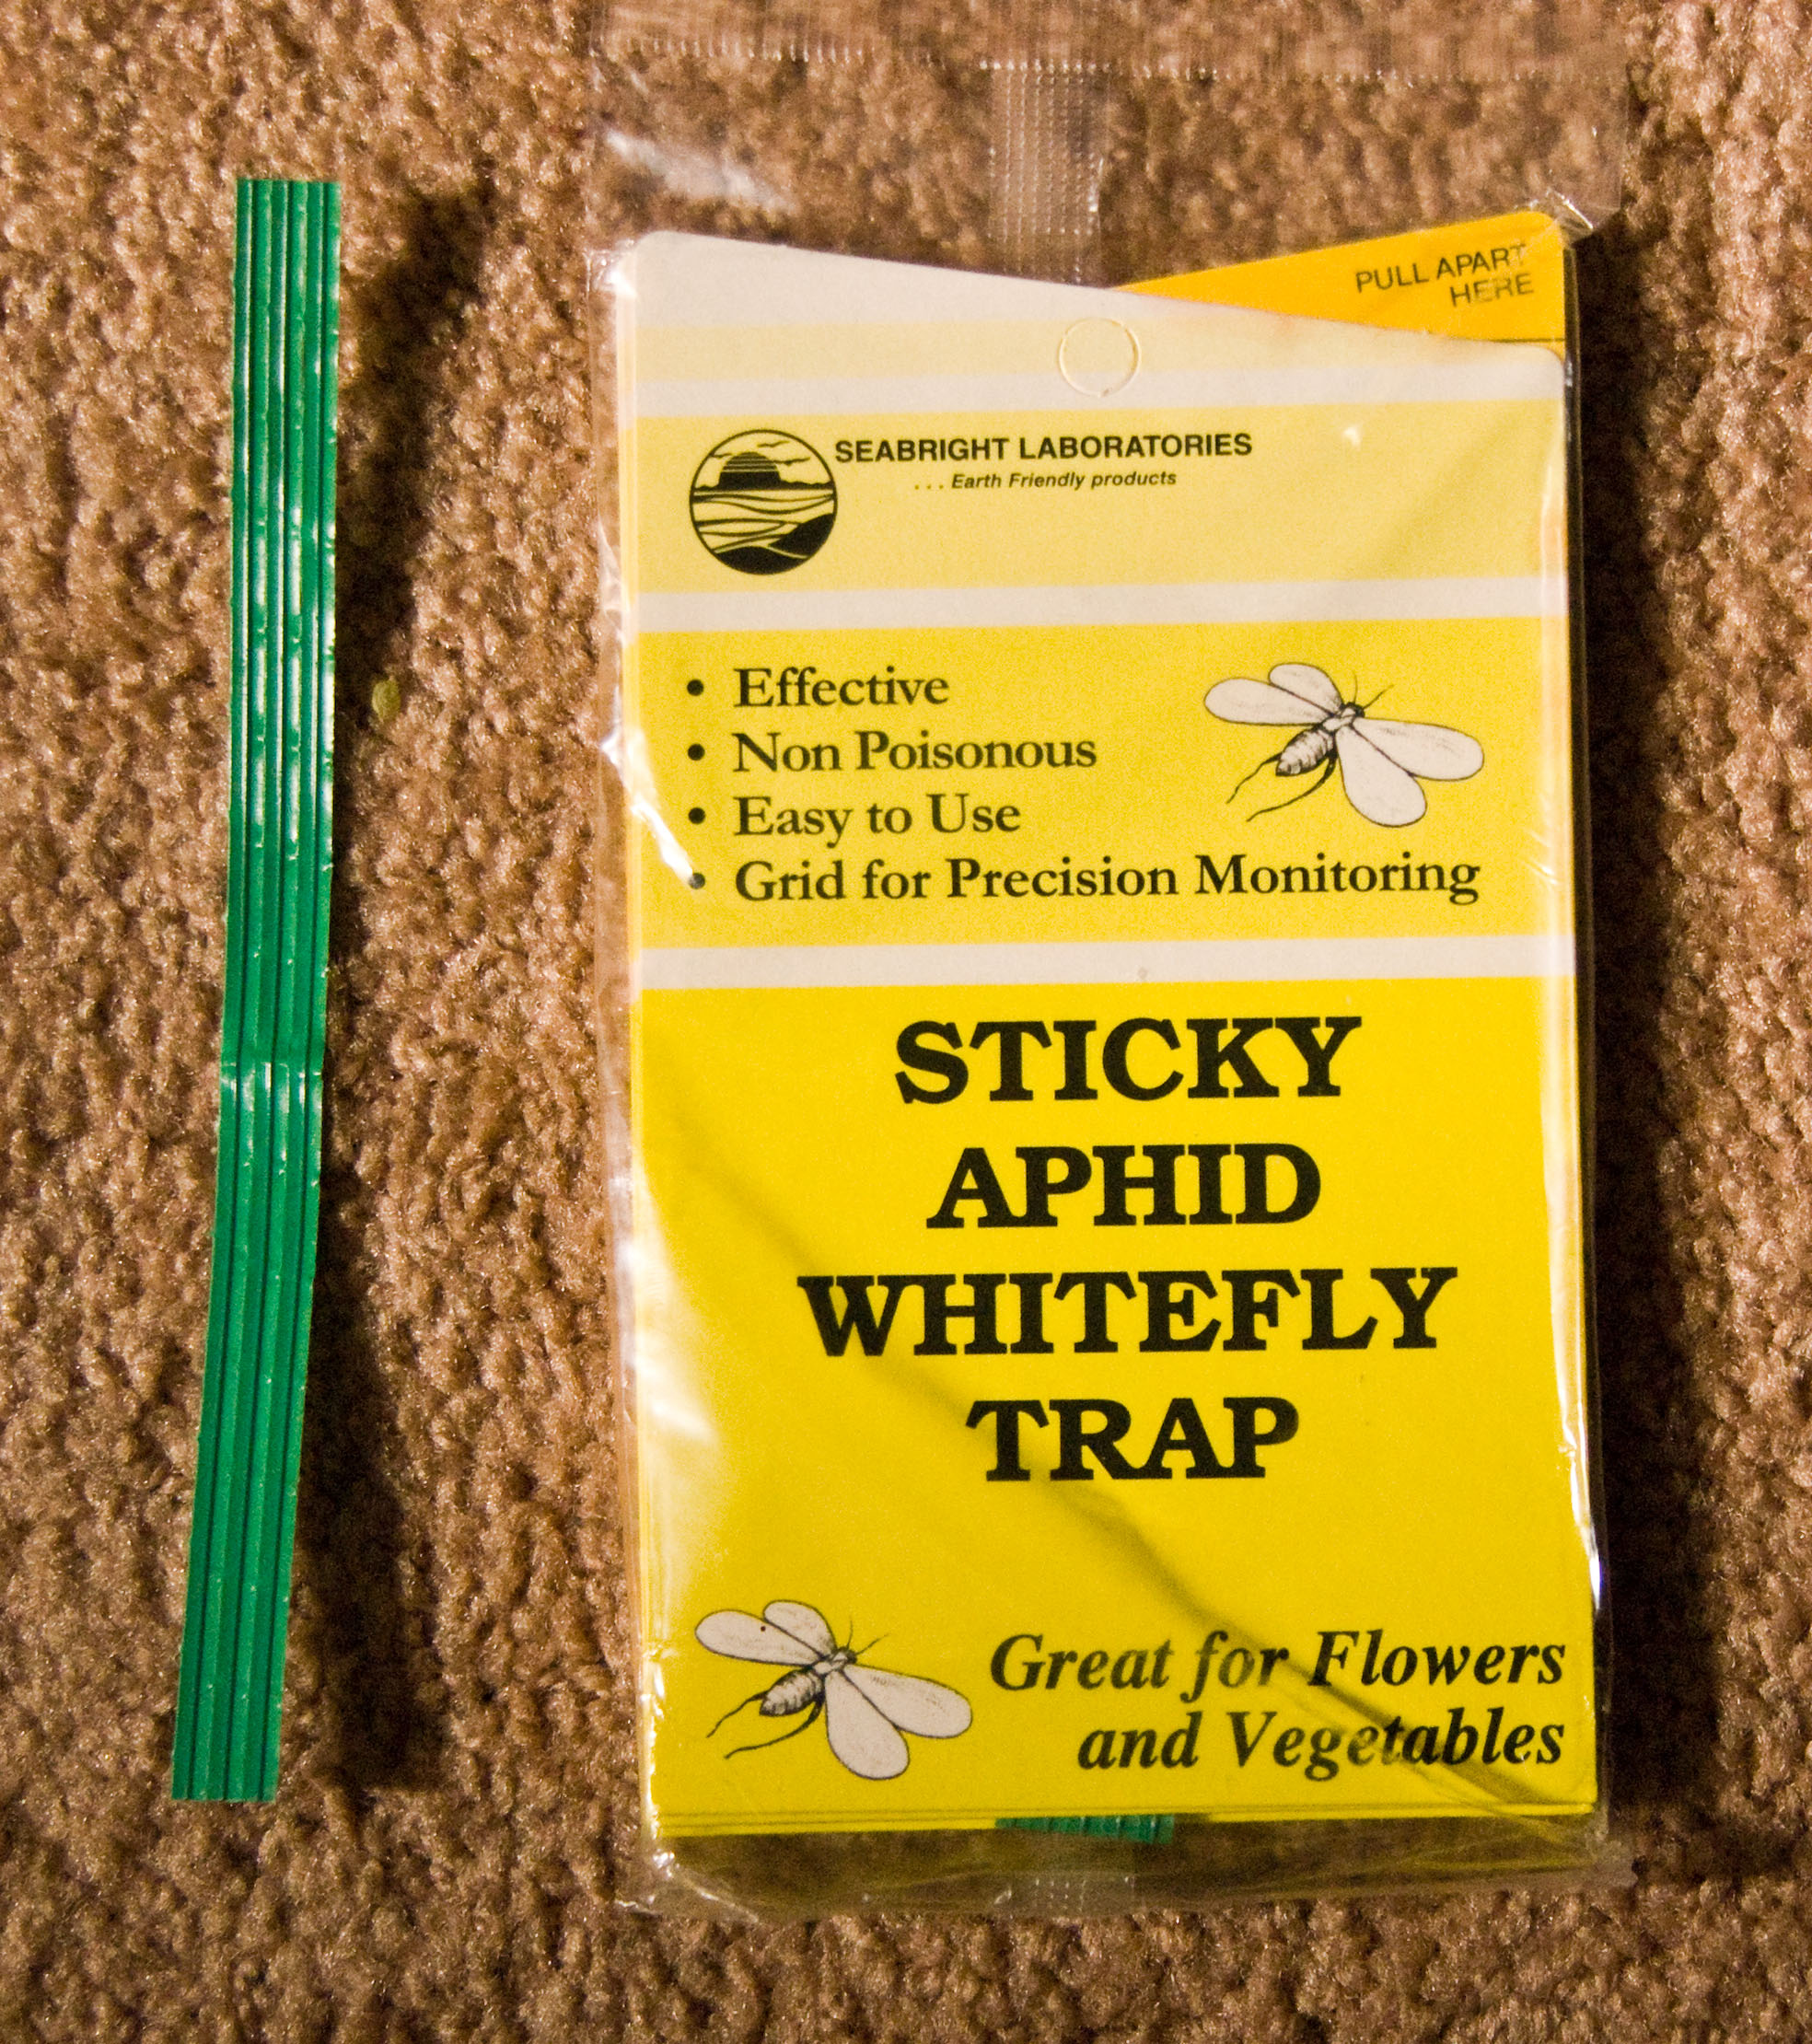 Sticky Aphid Whitefly Trap – Seabright Laboratories – Comprehensive Review